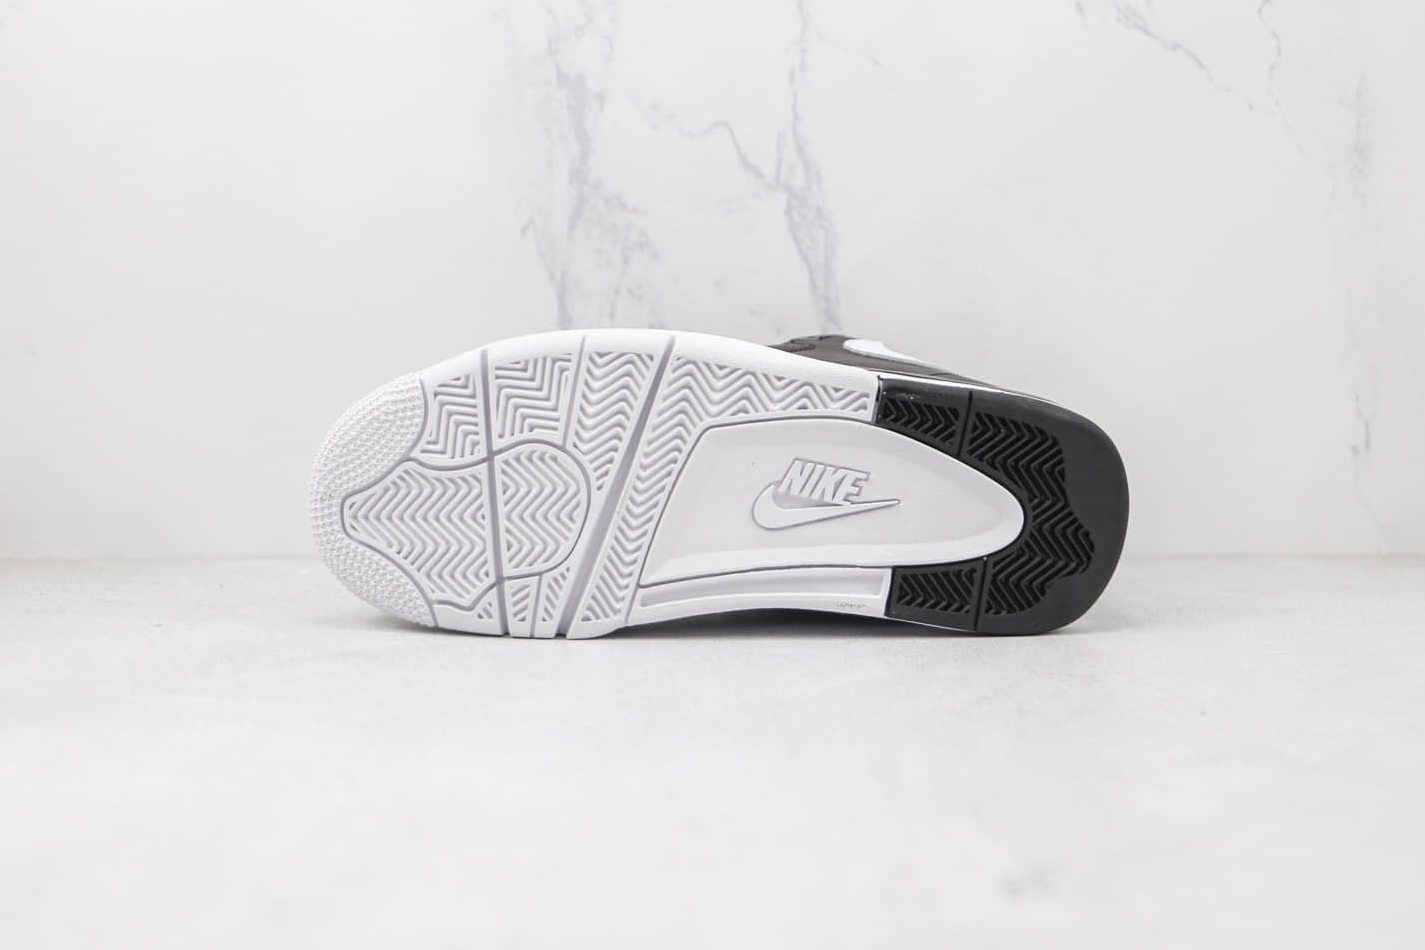 Nike Flight Legacy 'Black White' BQ4212-002 - Stylish and Versatile Footwear for All Occasions